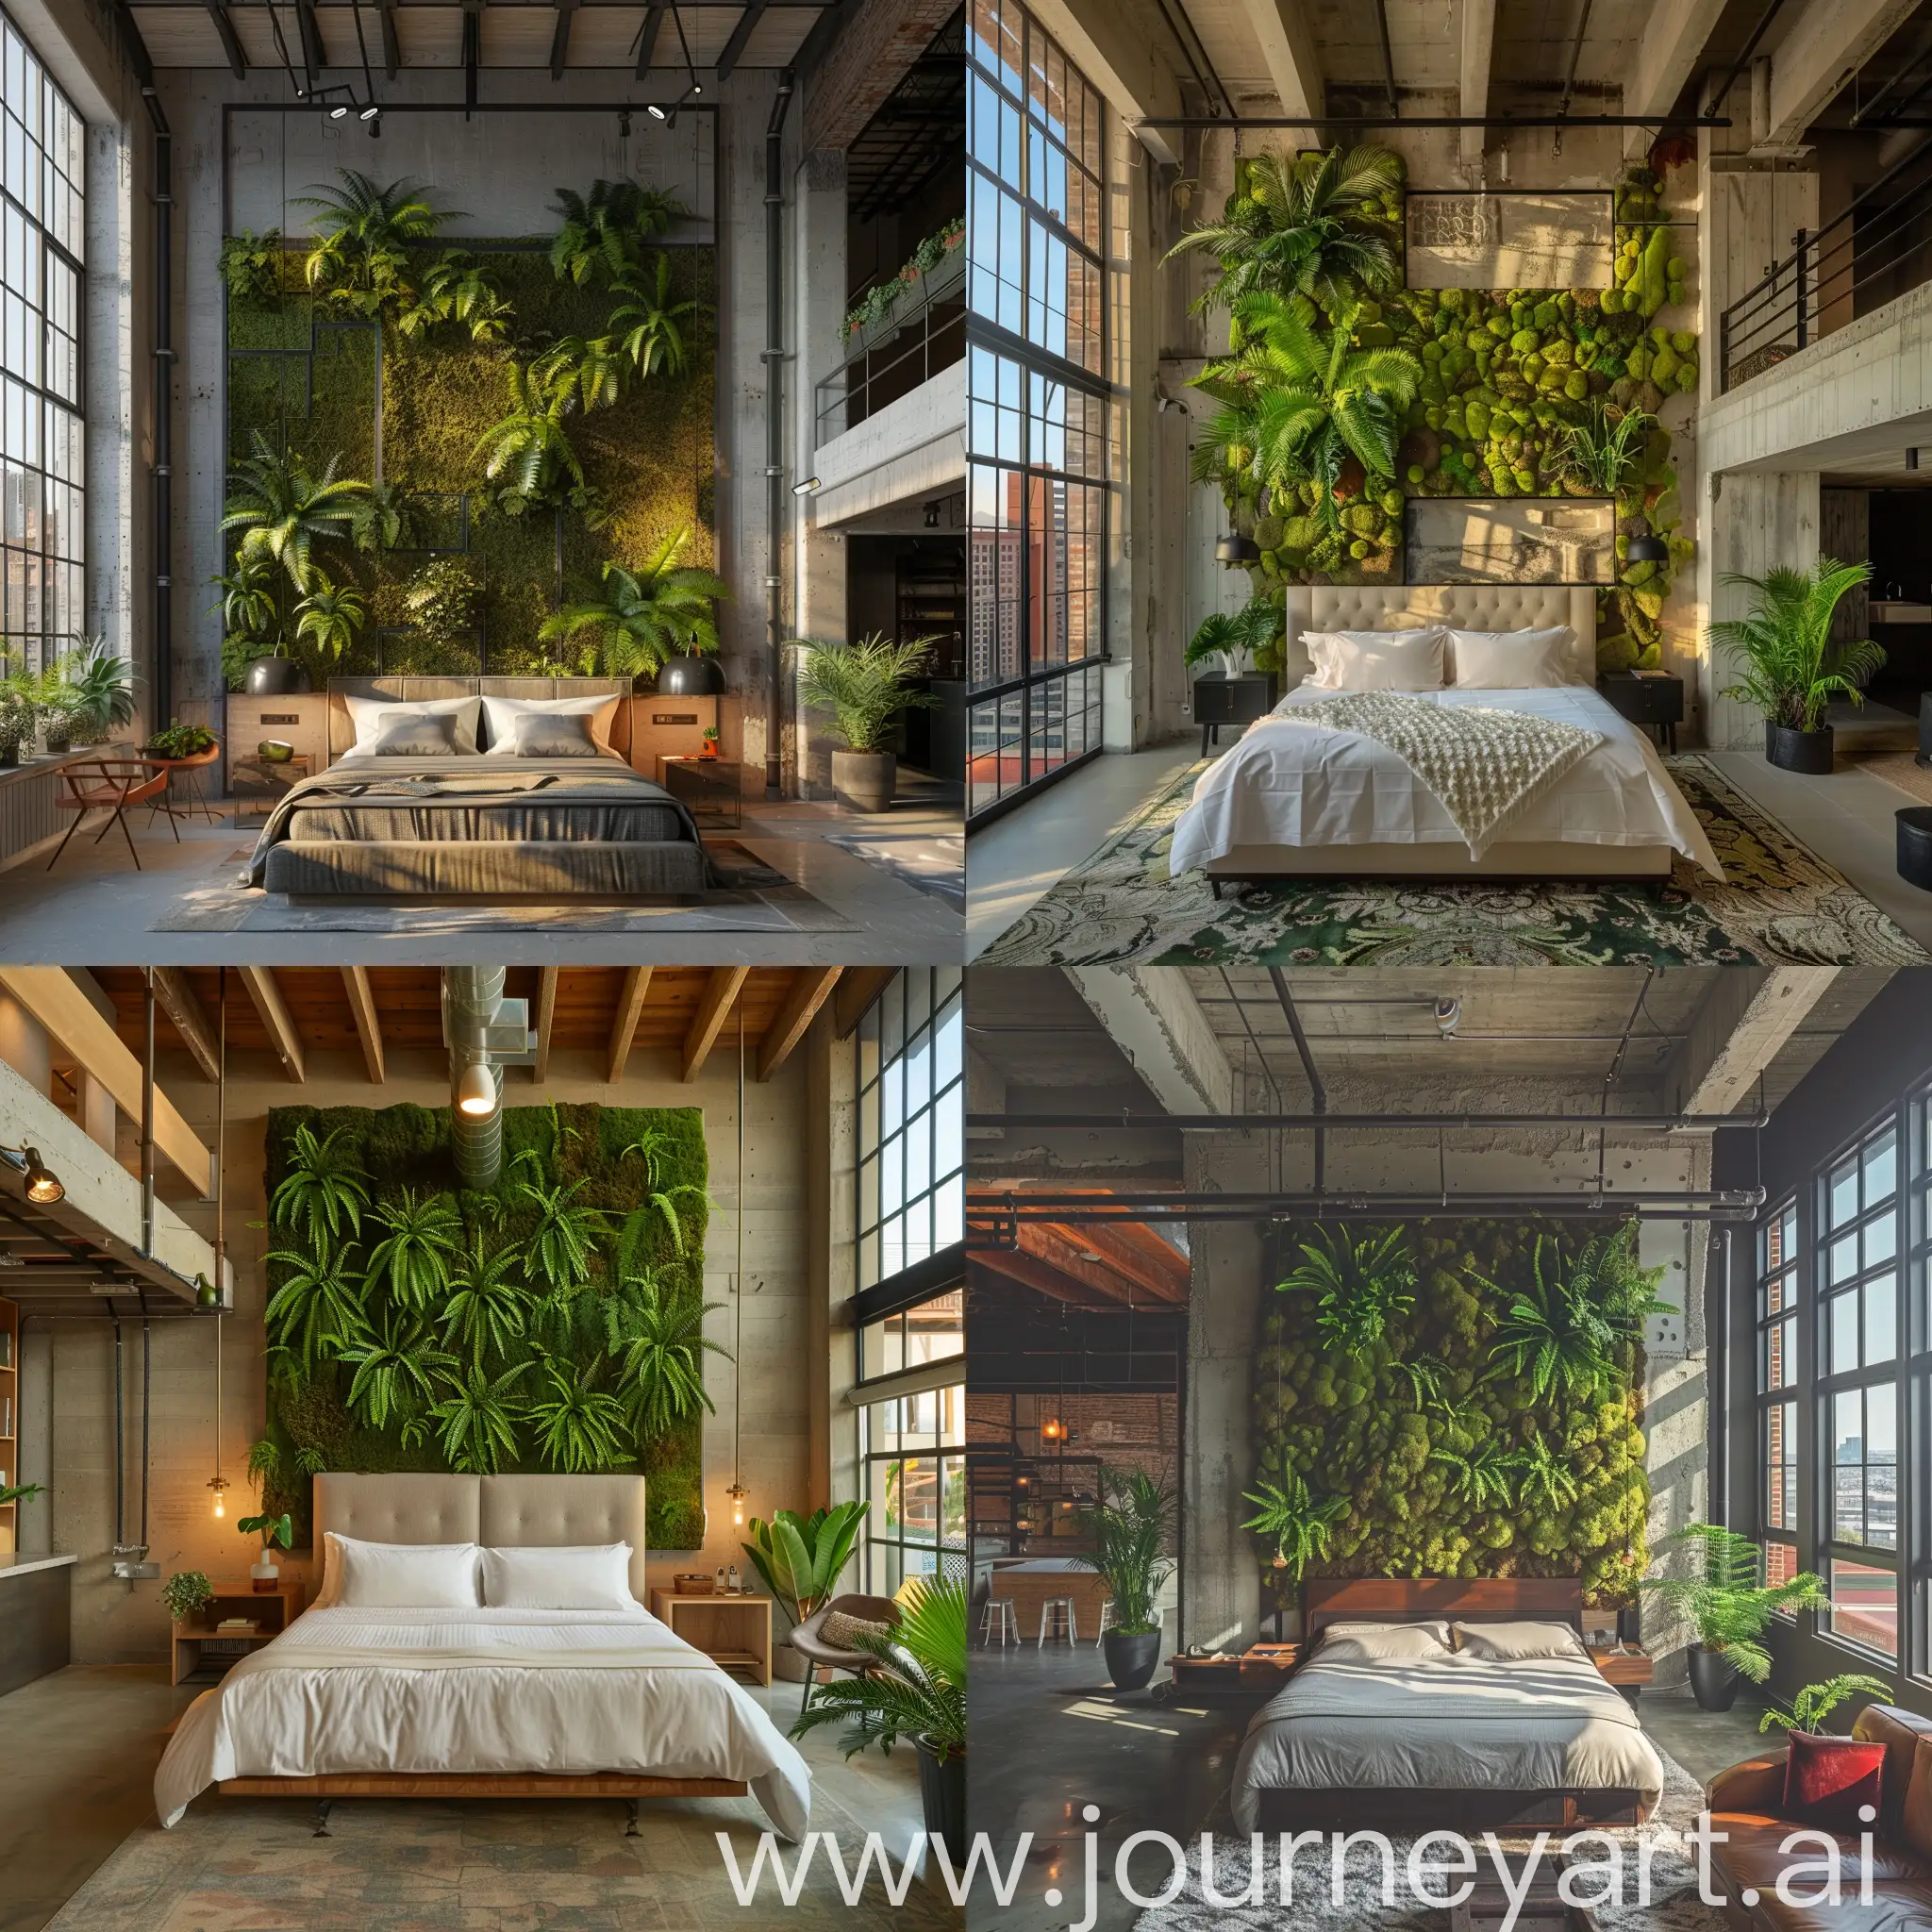 Luxurious-Loft-Bedroom-with-High-Ceilings-and-Natural-Greenery-Wall